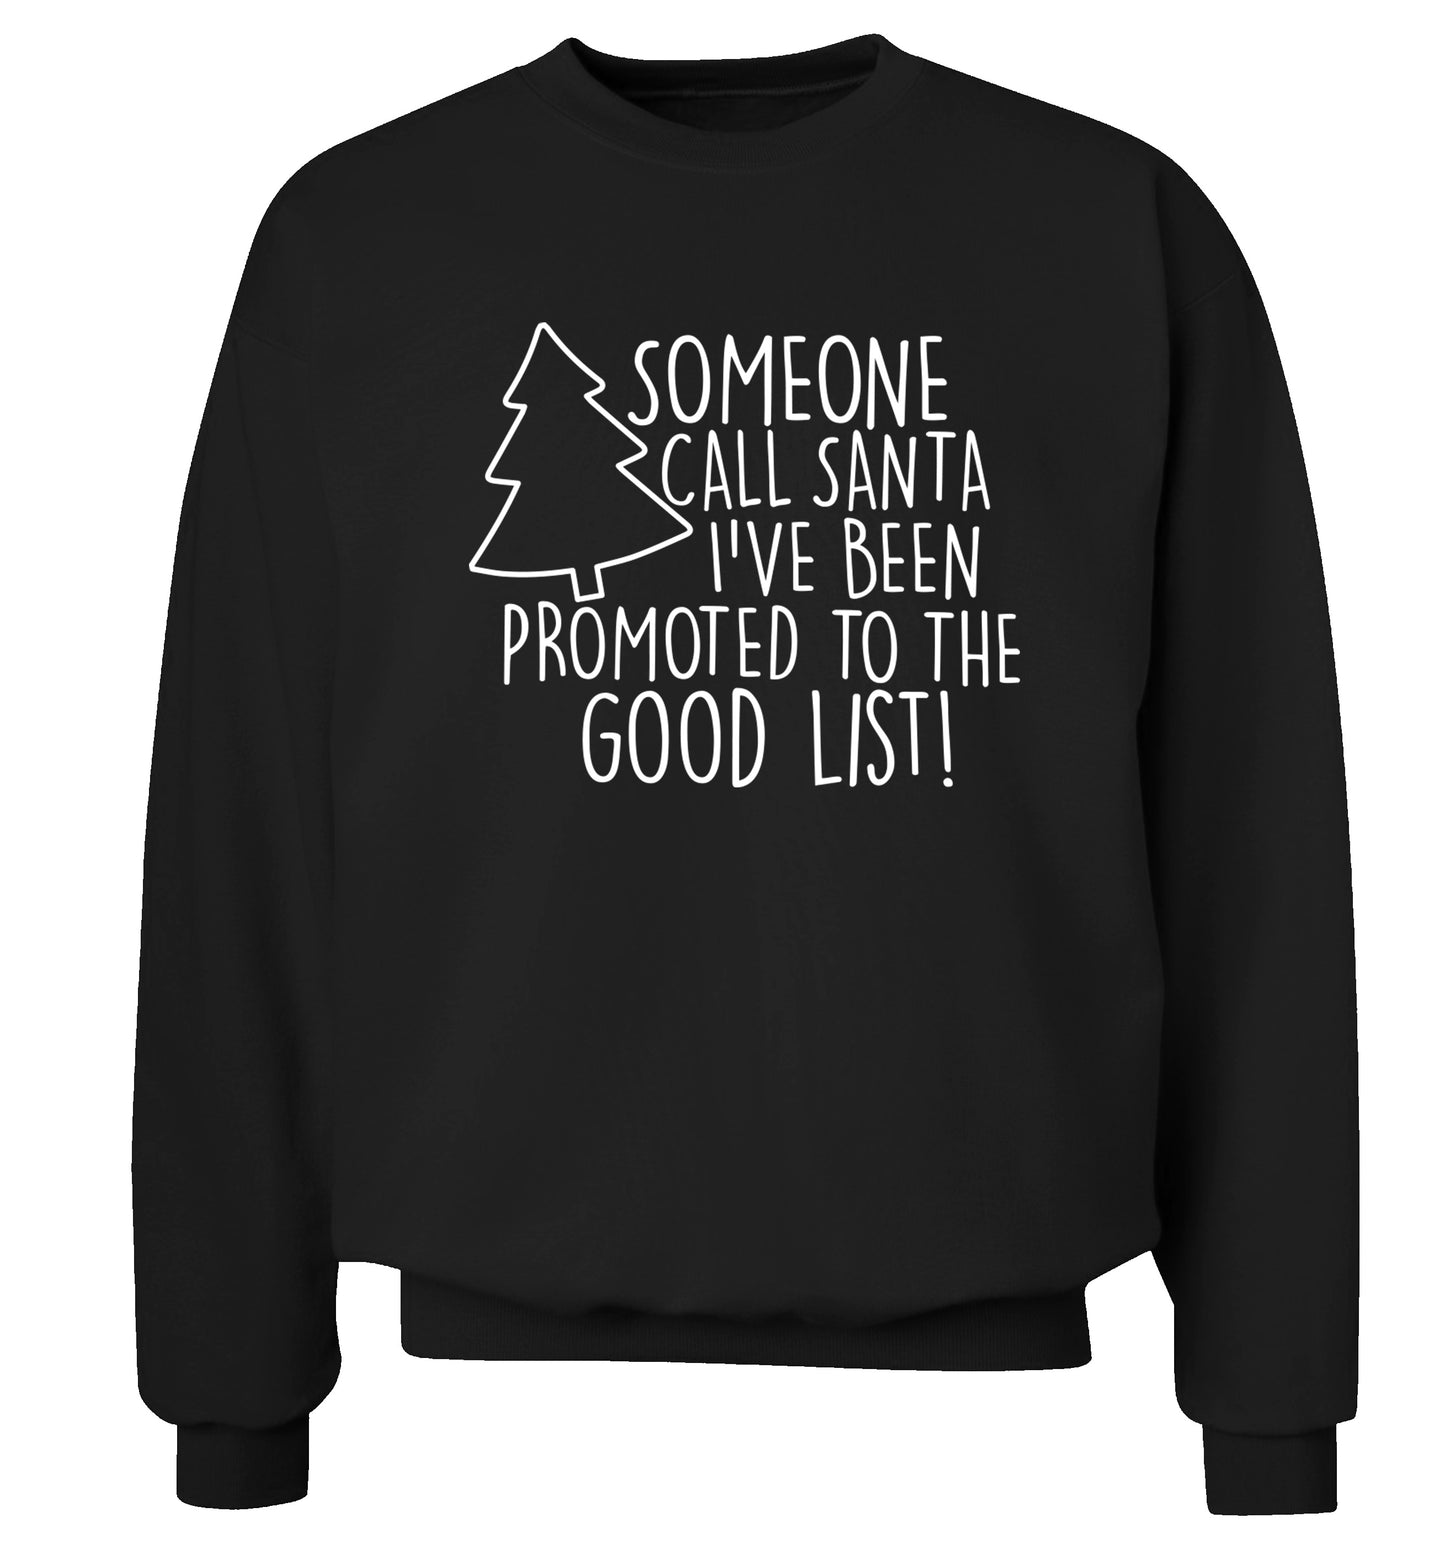 Someone call santa I've been promoted to the good list! Adult's unisex black Sweater 2XL